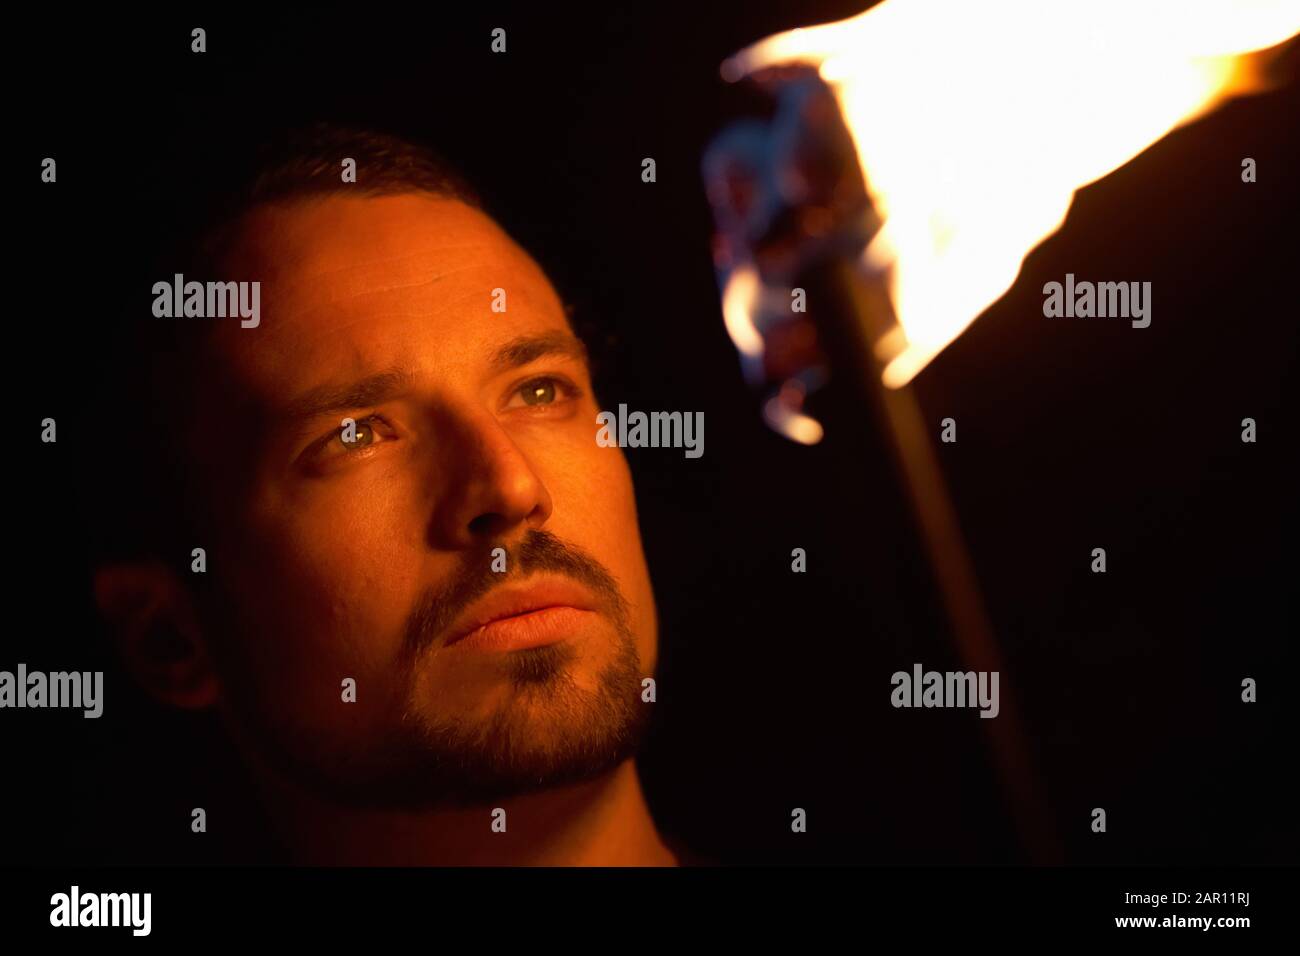 man holding burning fire torch staring into flame with face lit by the fire Stock Photo